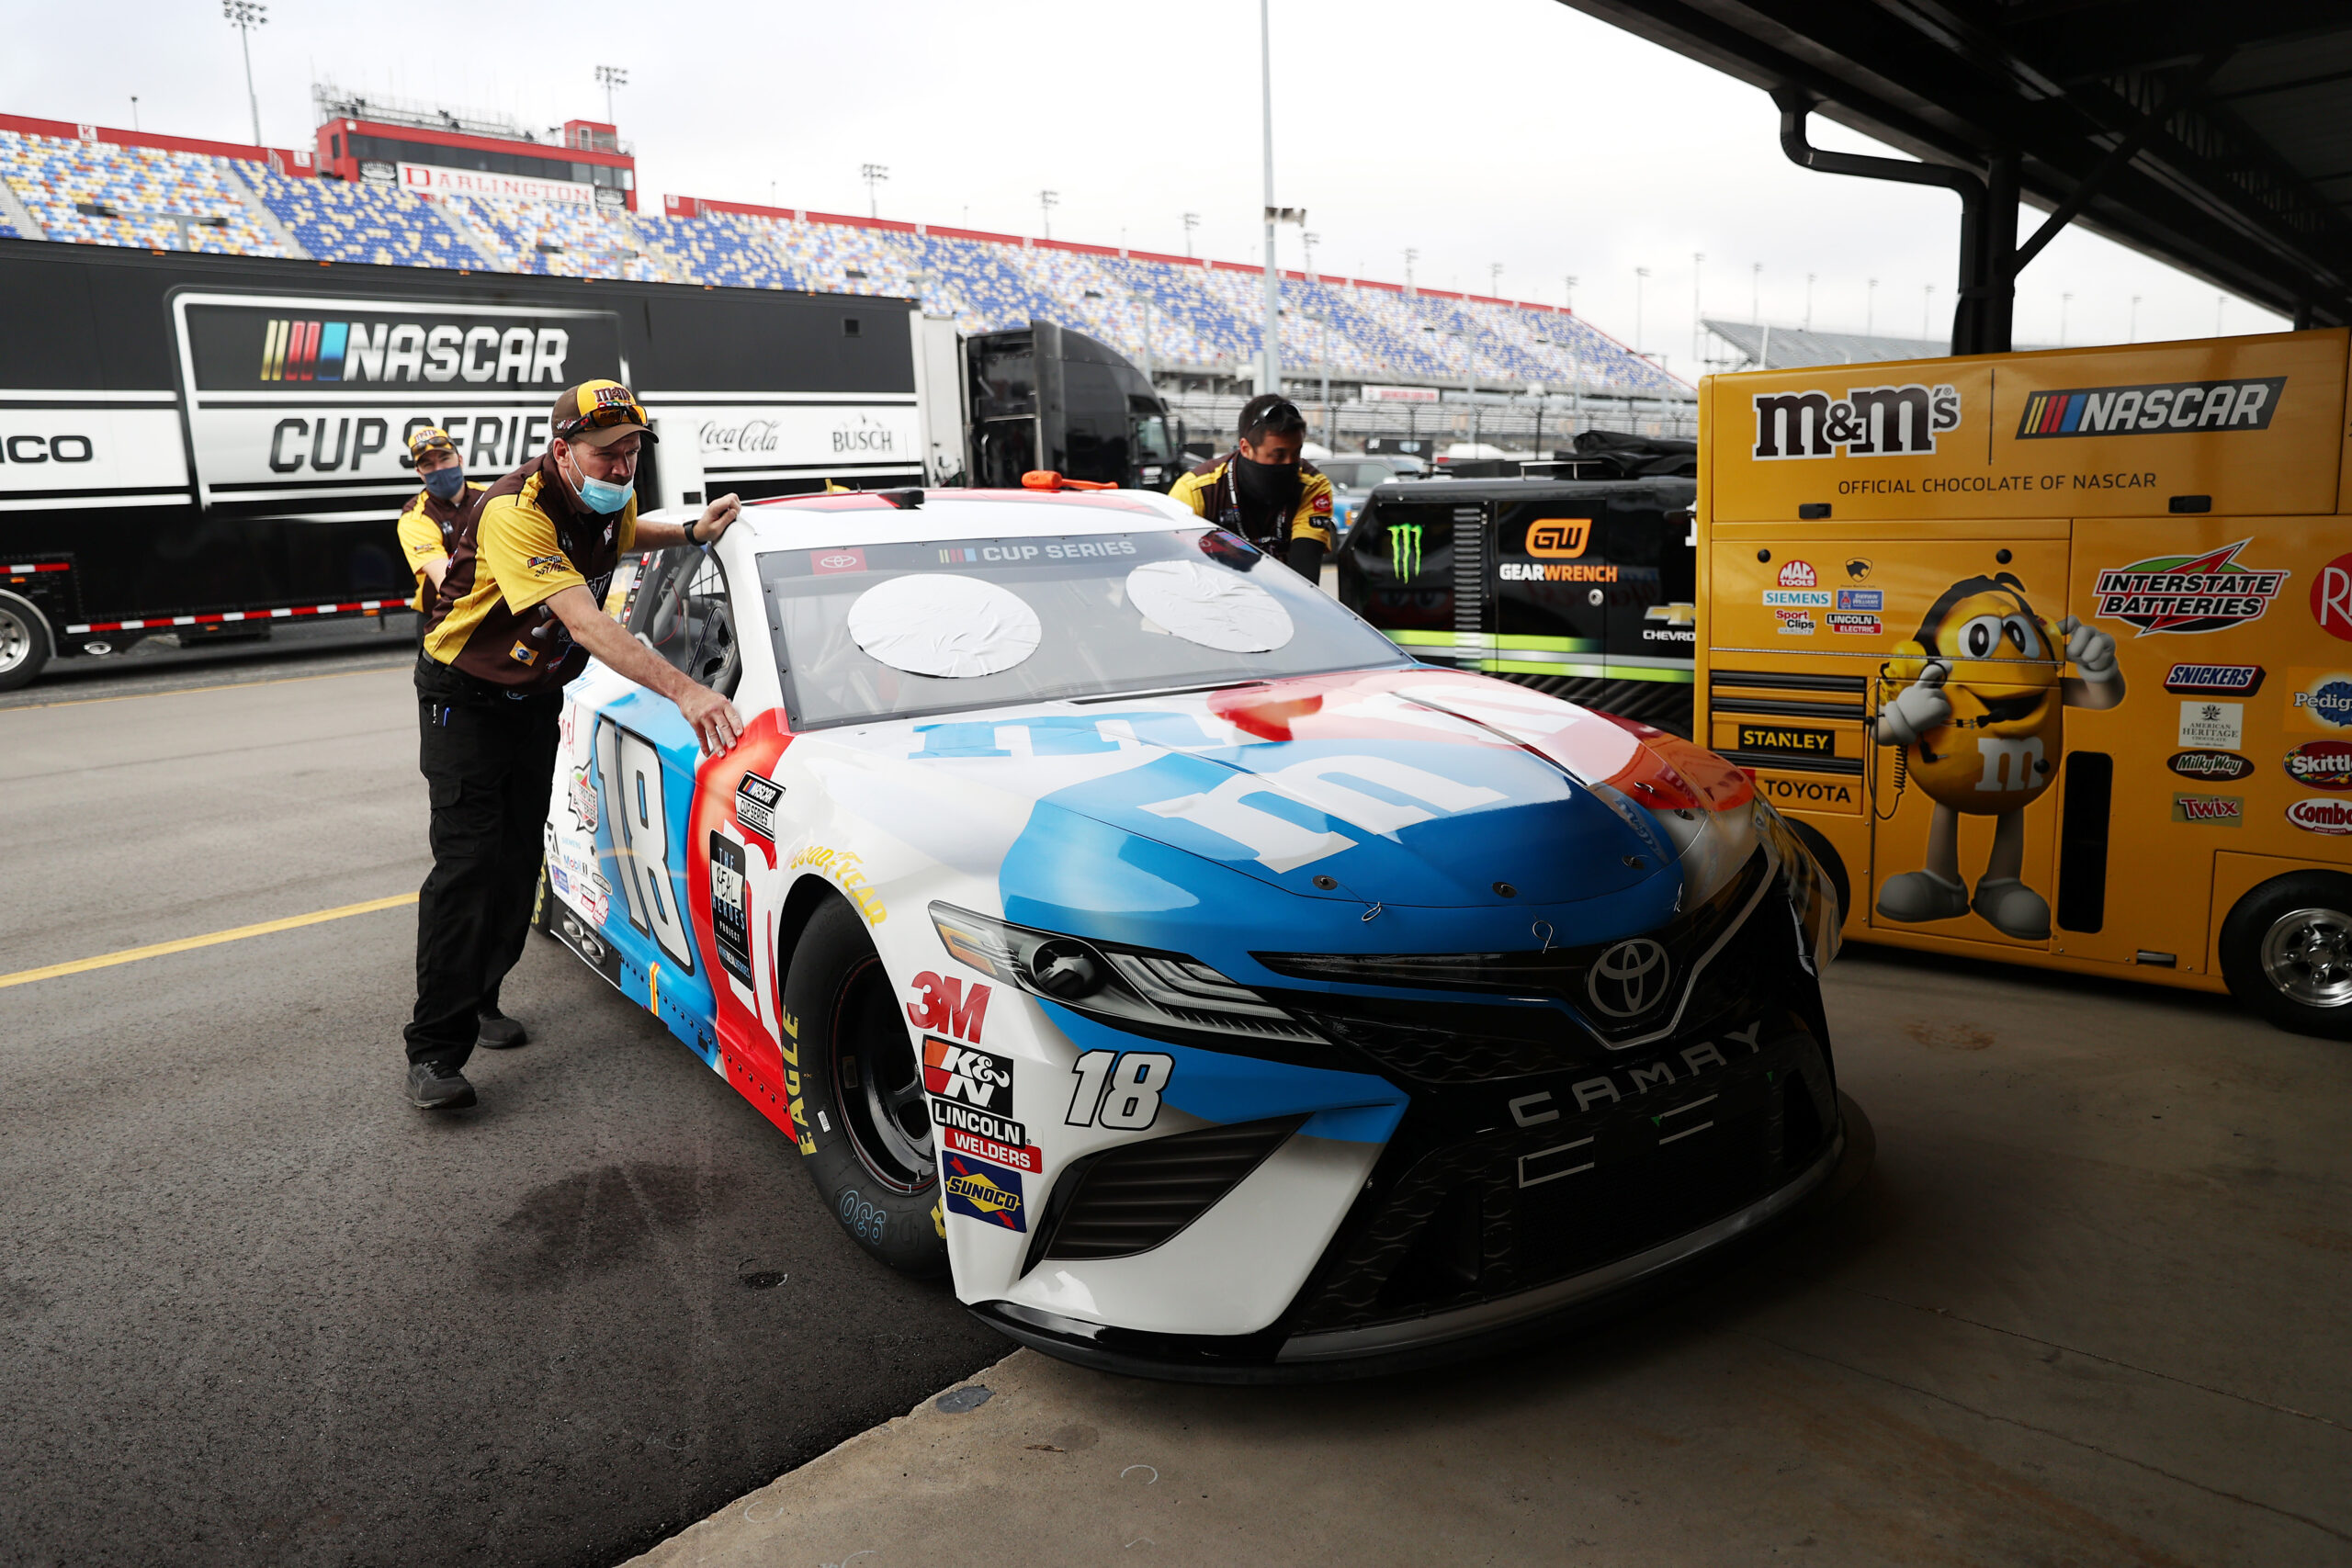 As NASCAR prepares for its return with the Real Heroes 400, Kyle Busch's crew prepares for Darlington. (Photo Credit: Chris Graythen/Getty Images)